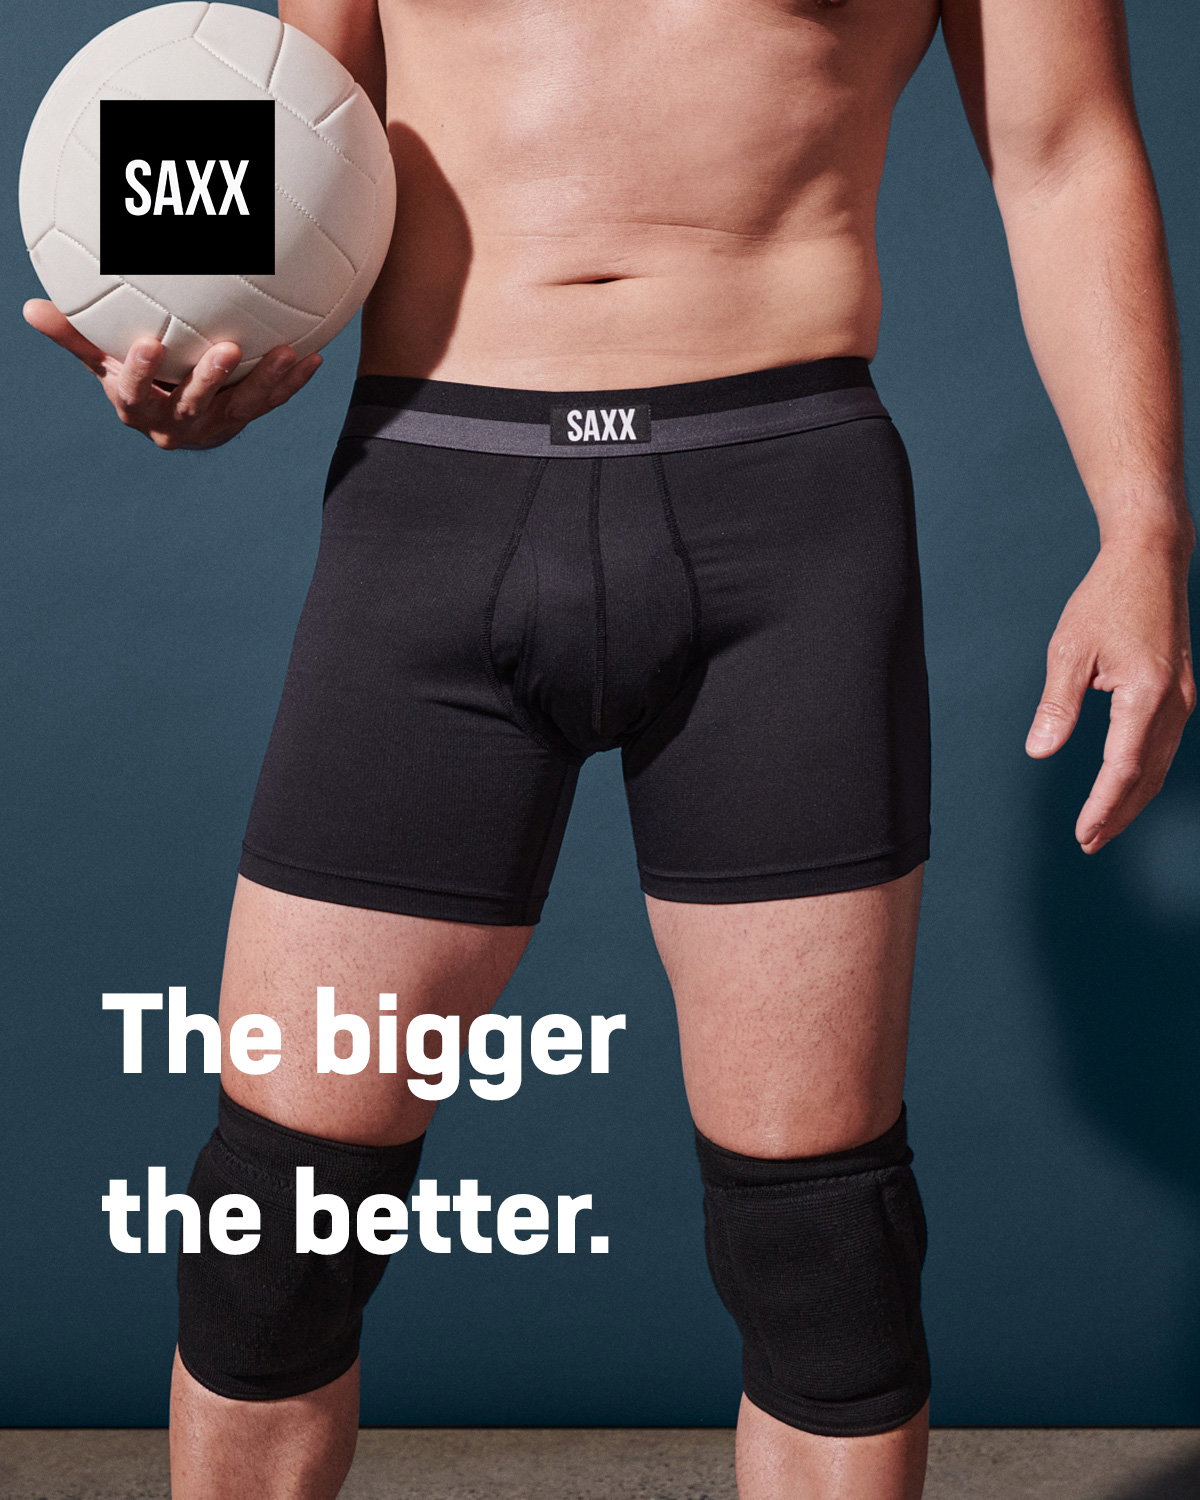 SAXX Kinetic HD Men's Boxer Brief, Save 20% on Subscription